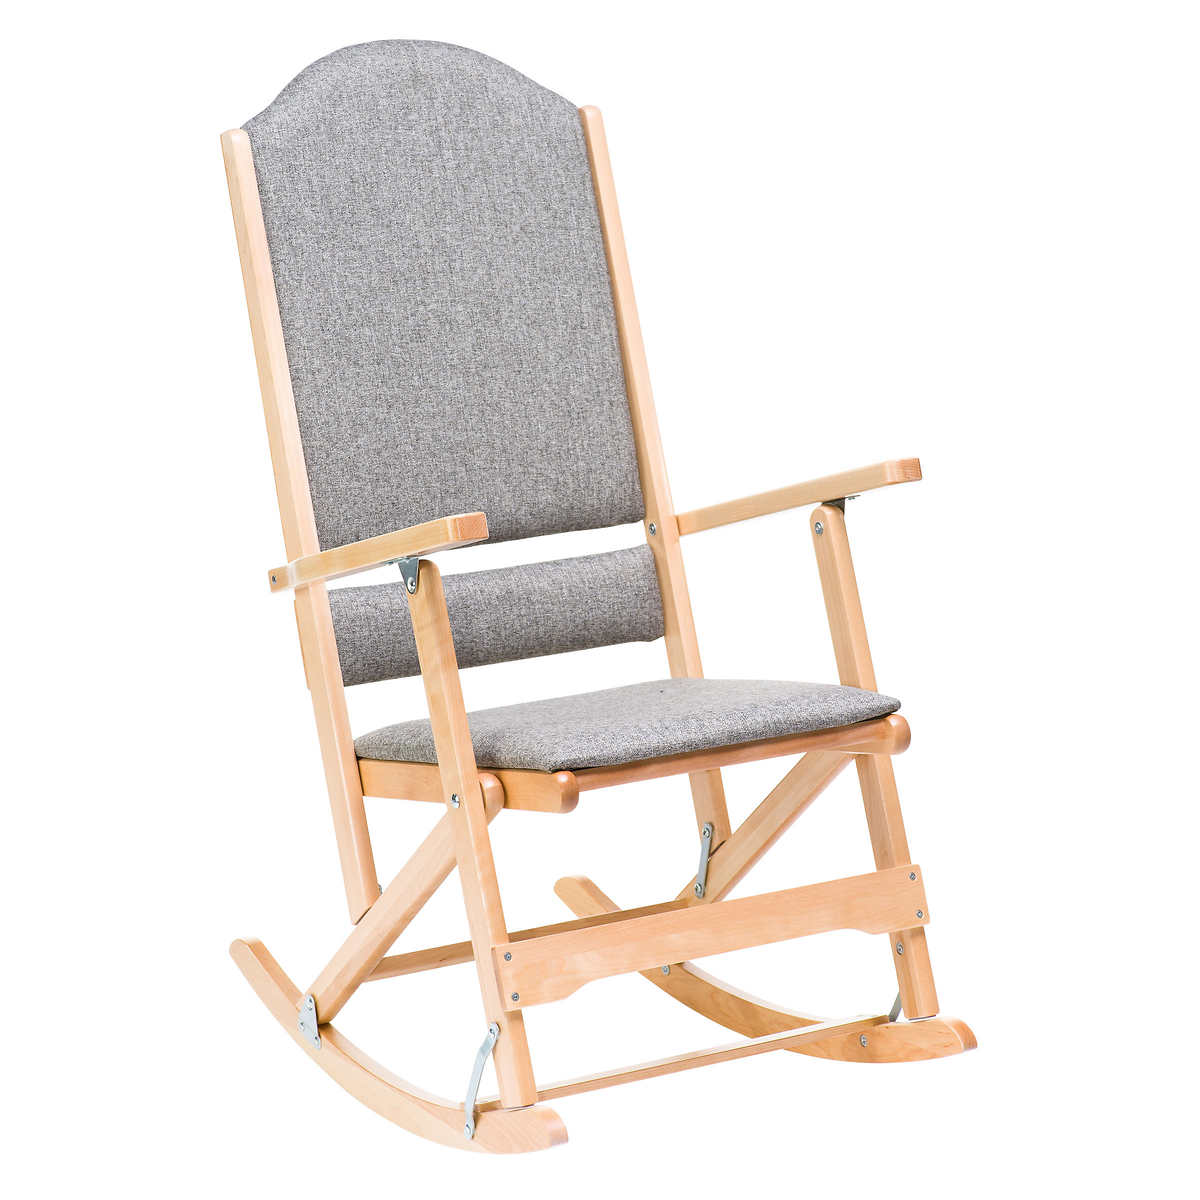 poitras adult folding rocking chair in natural stain wood